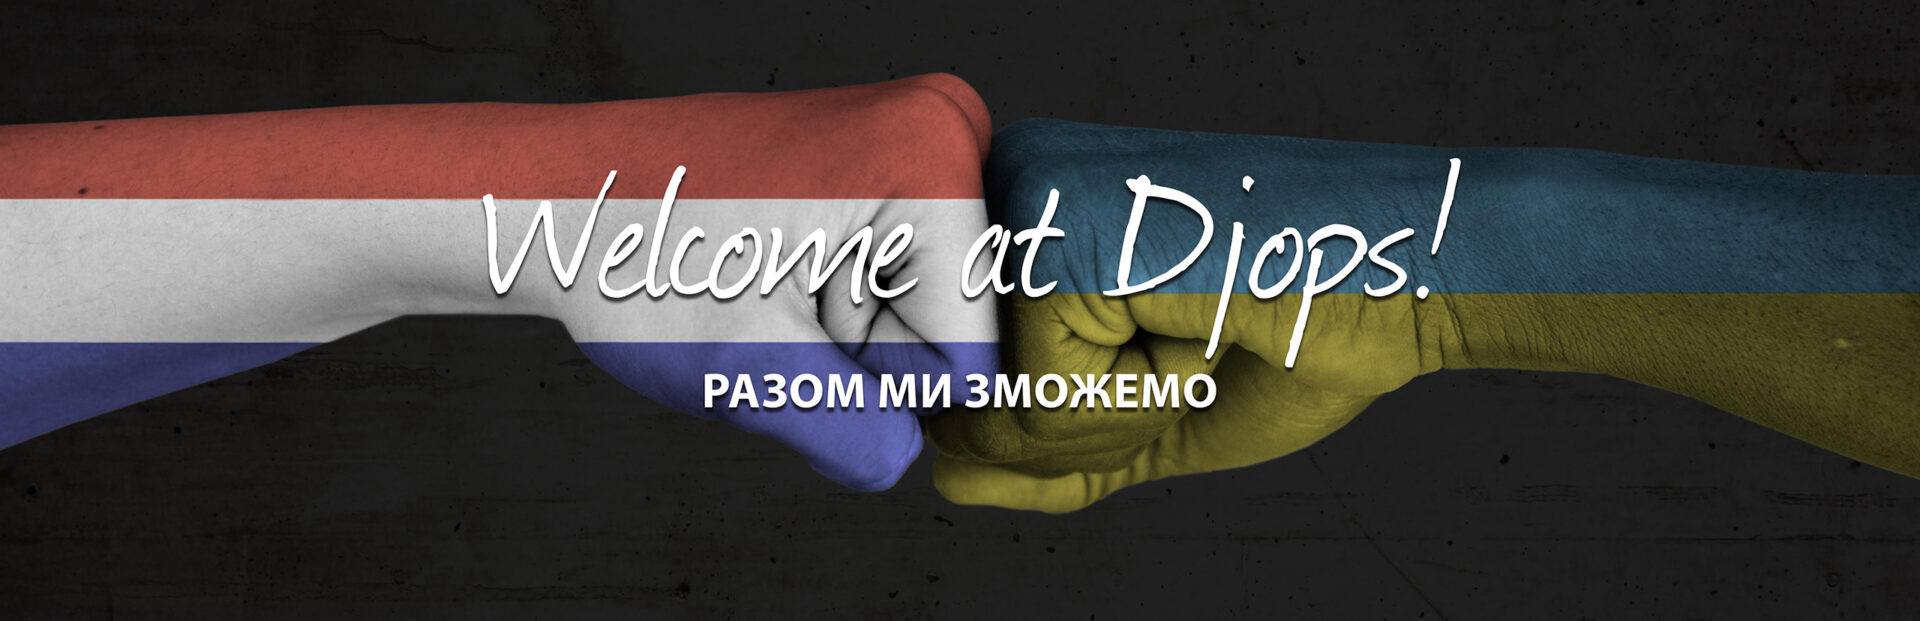 Welcome at Djops! Together we can